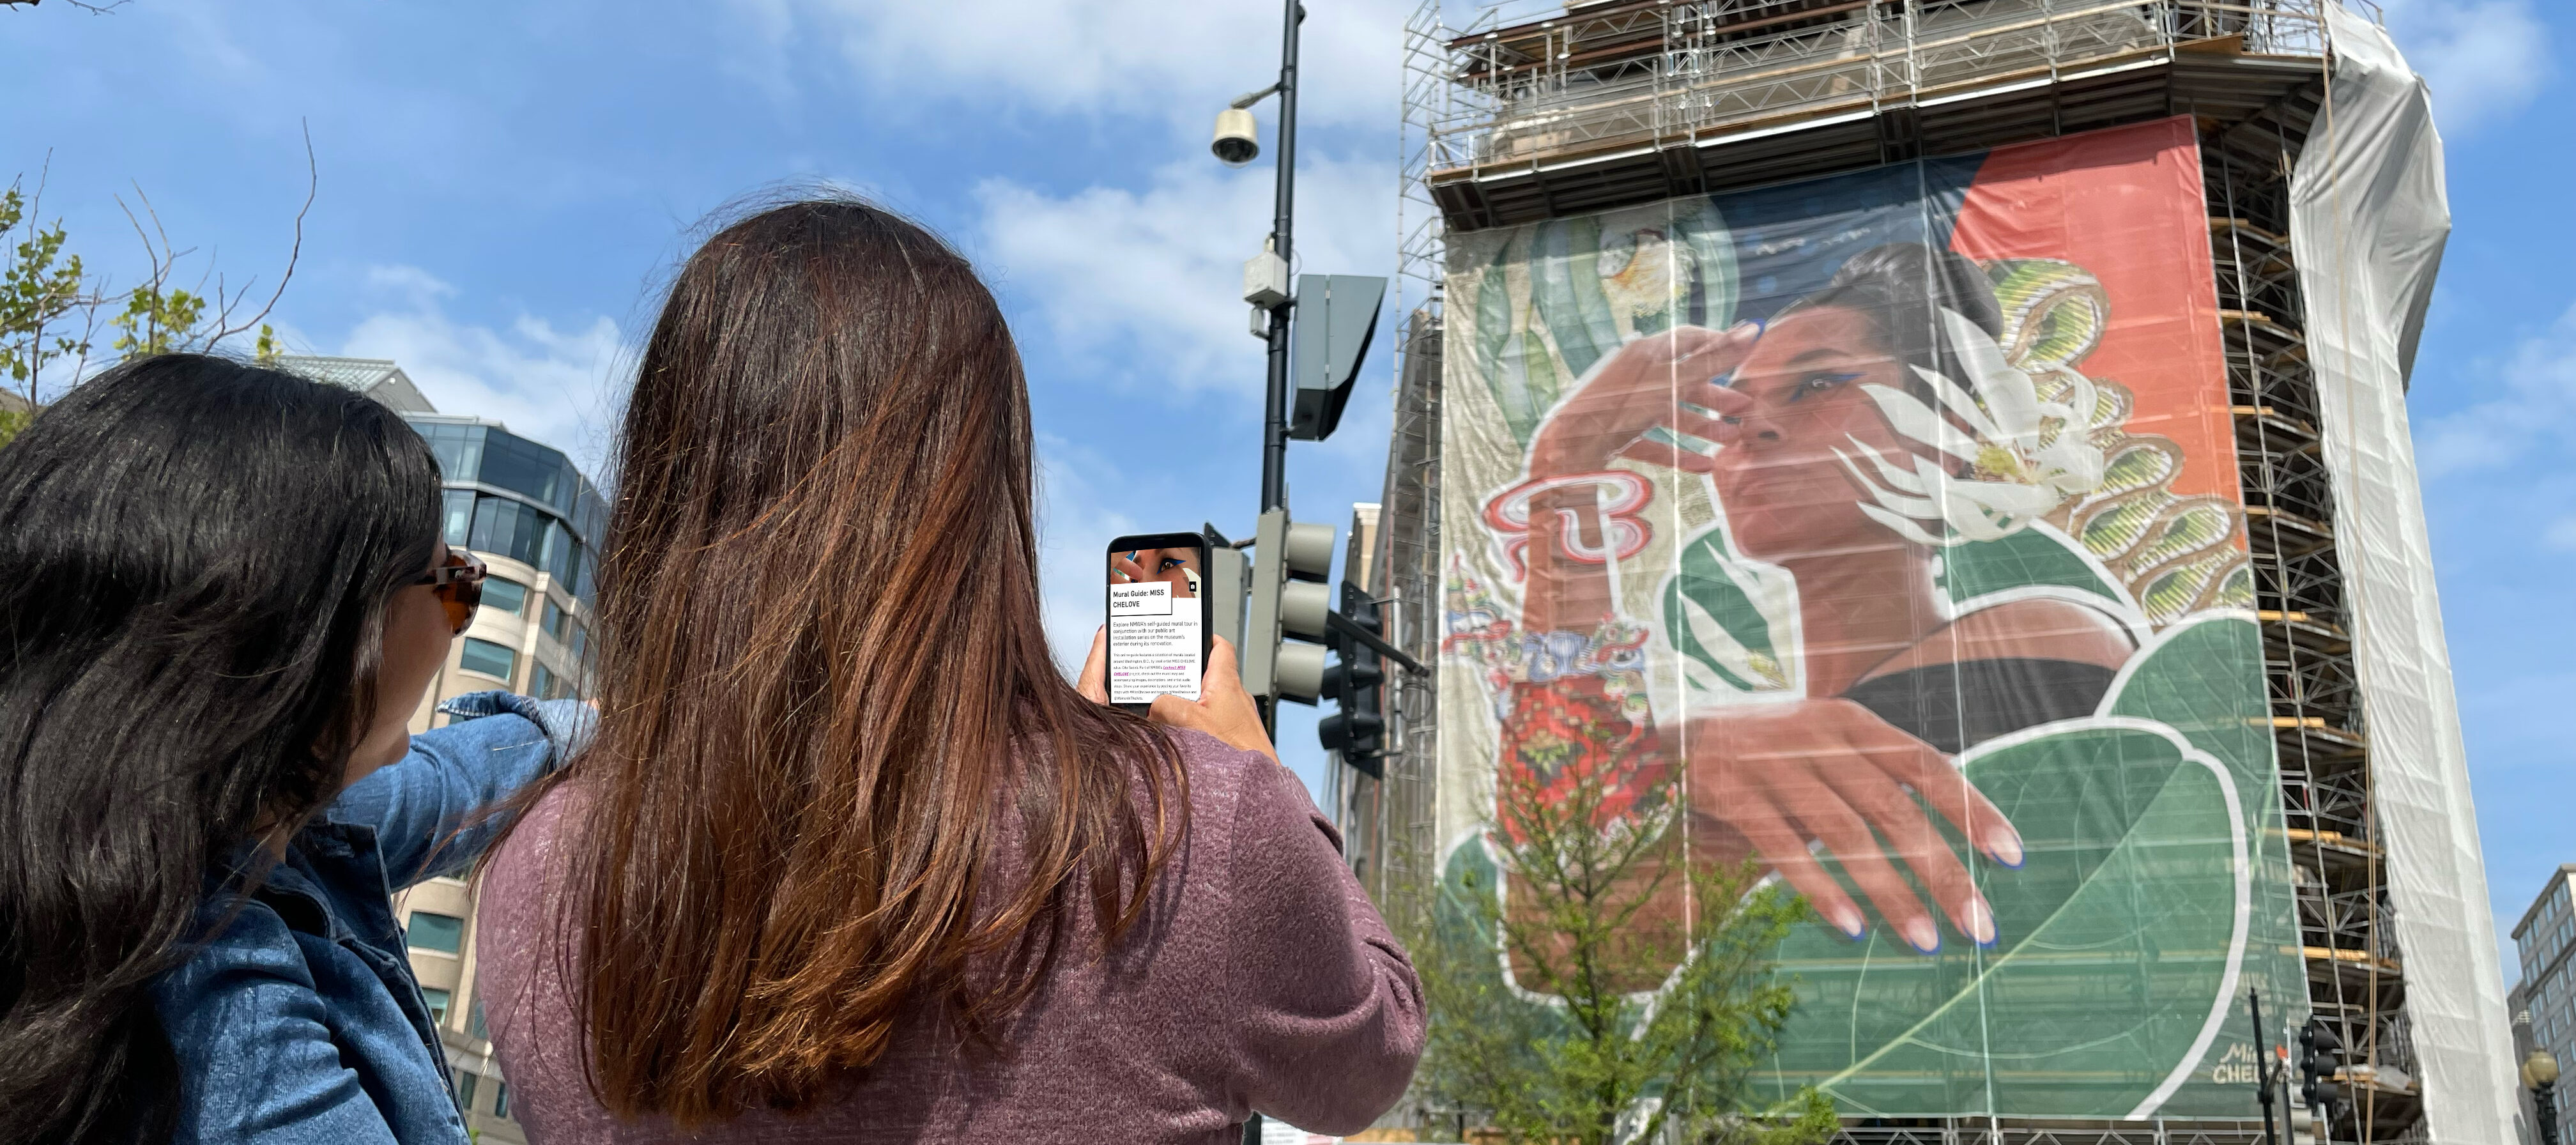 Two women with medium skin tone and long brown hair use their cell phone to look at the online mural guide while looking at the large mural on the museum's building exterior.